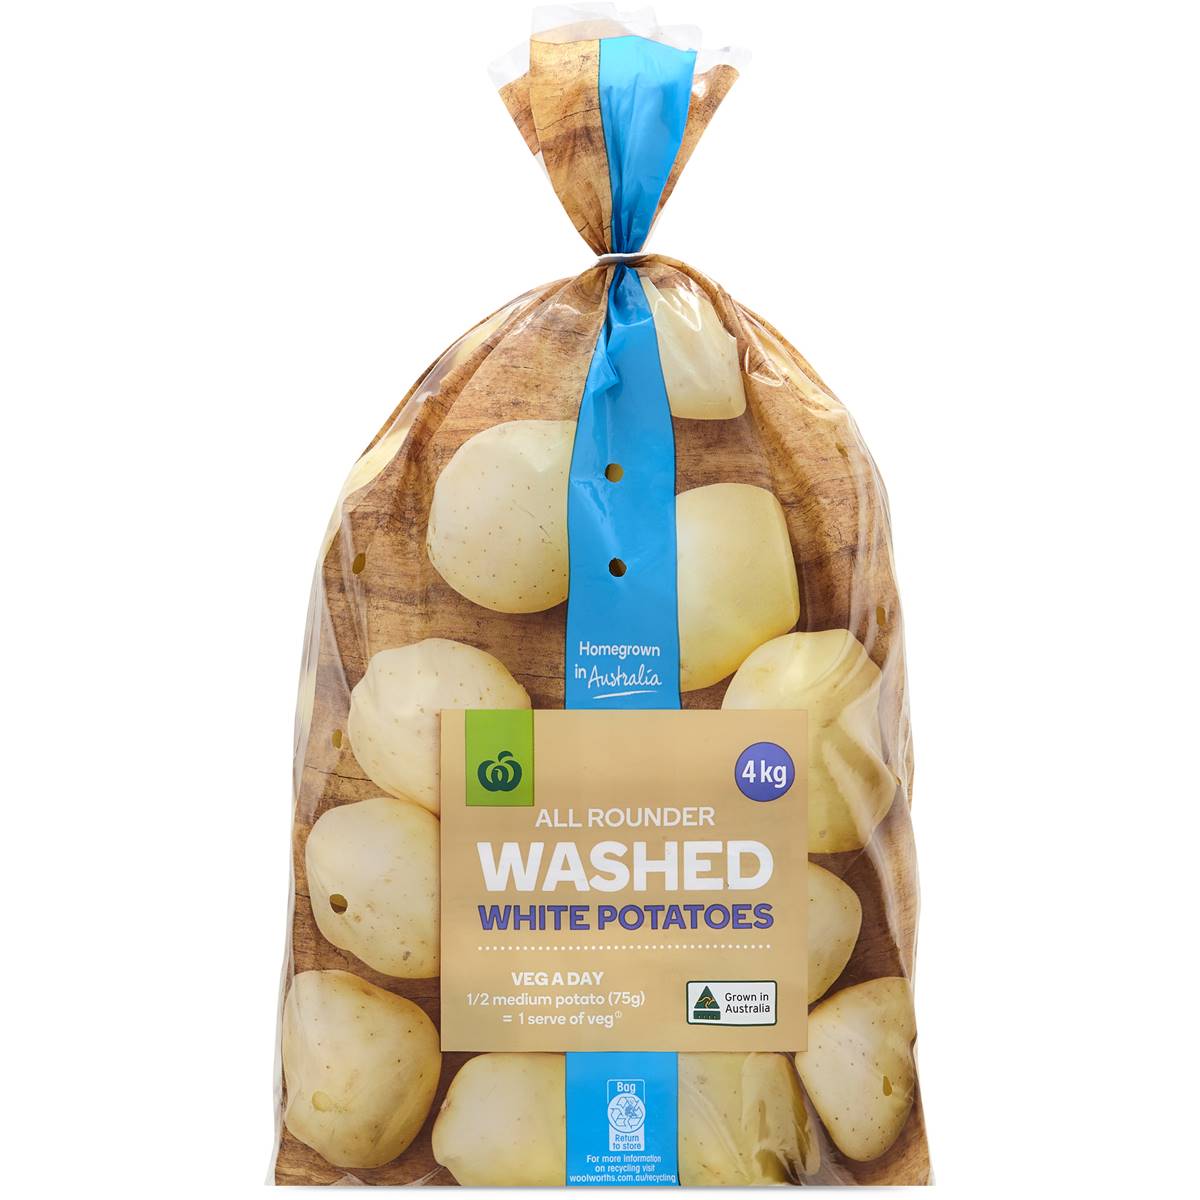 Calories in Woolworths Washed Potato